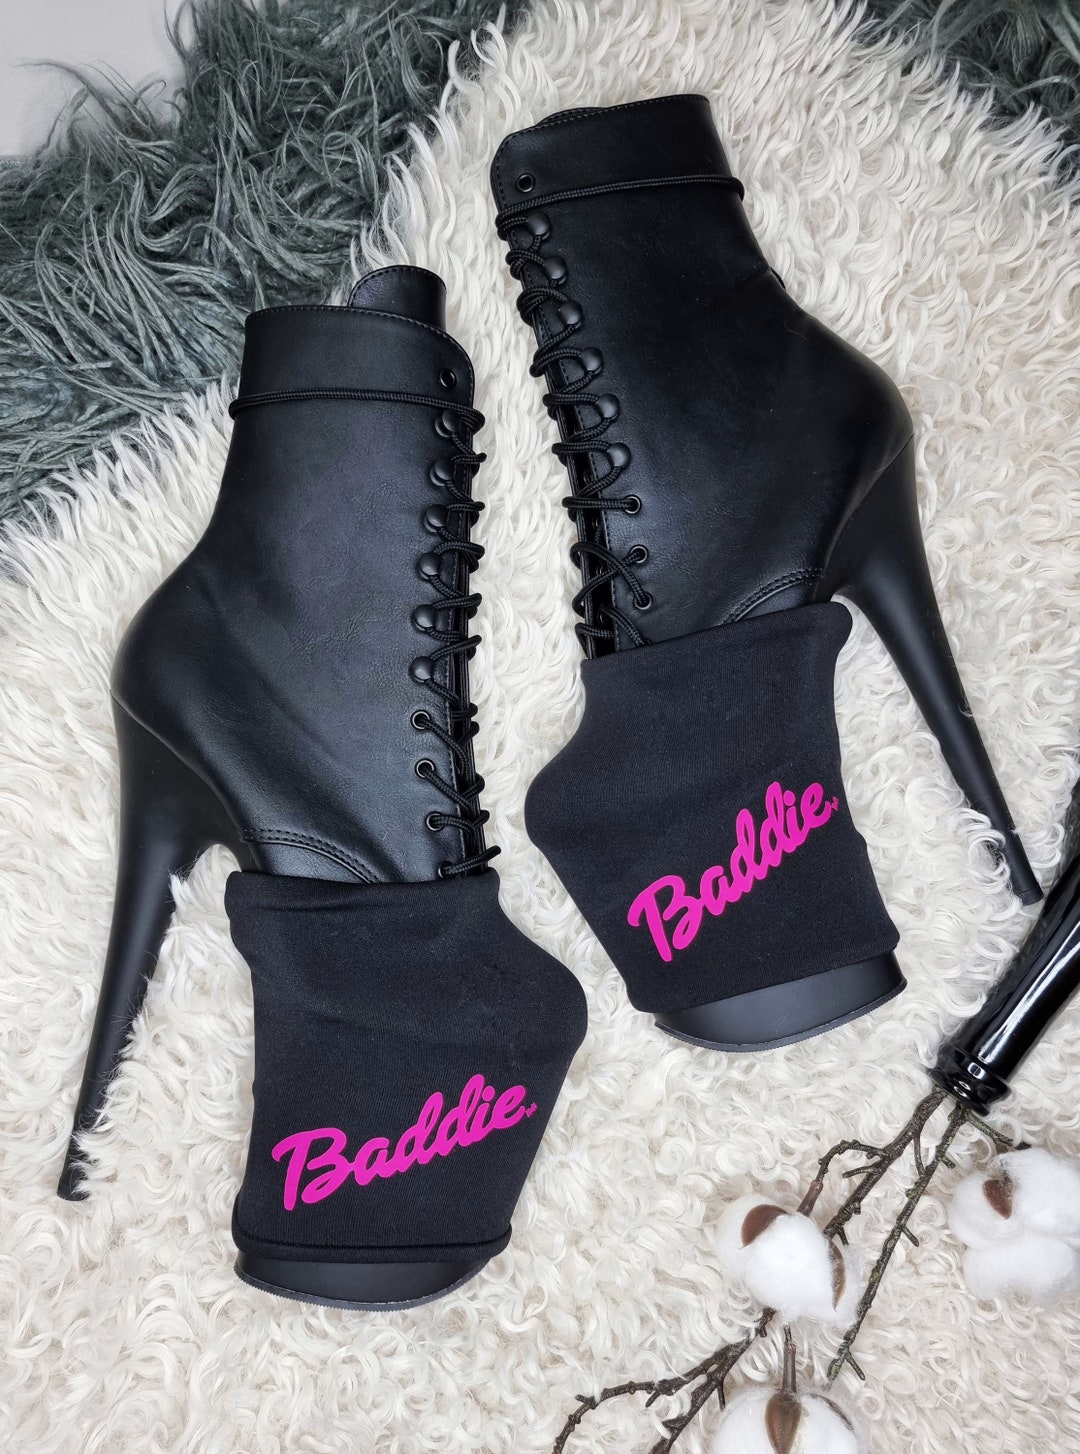 Stunning Black Lace Up & Strappy Heels for the Baddie Girl's